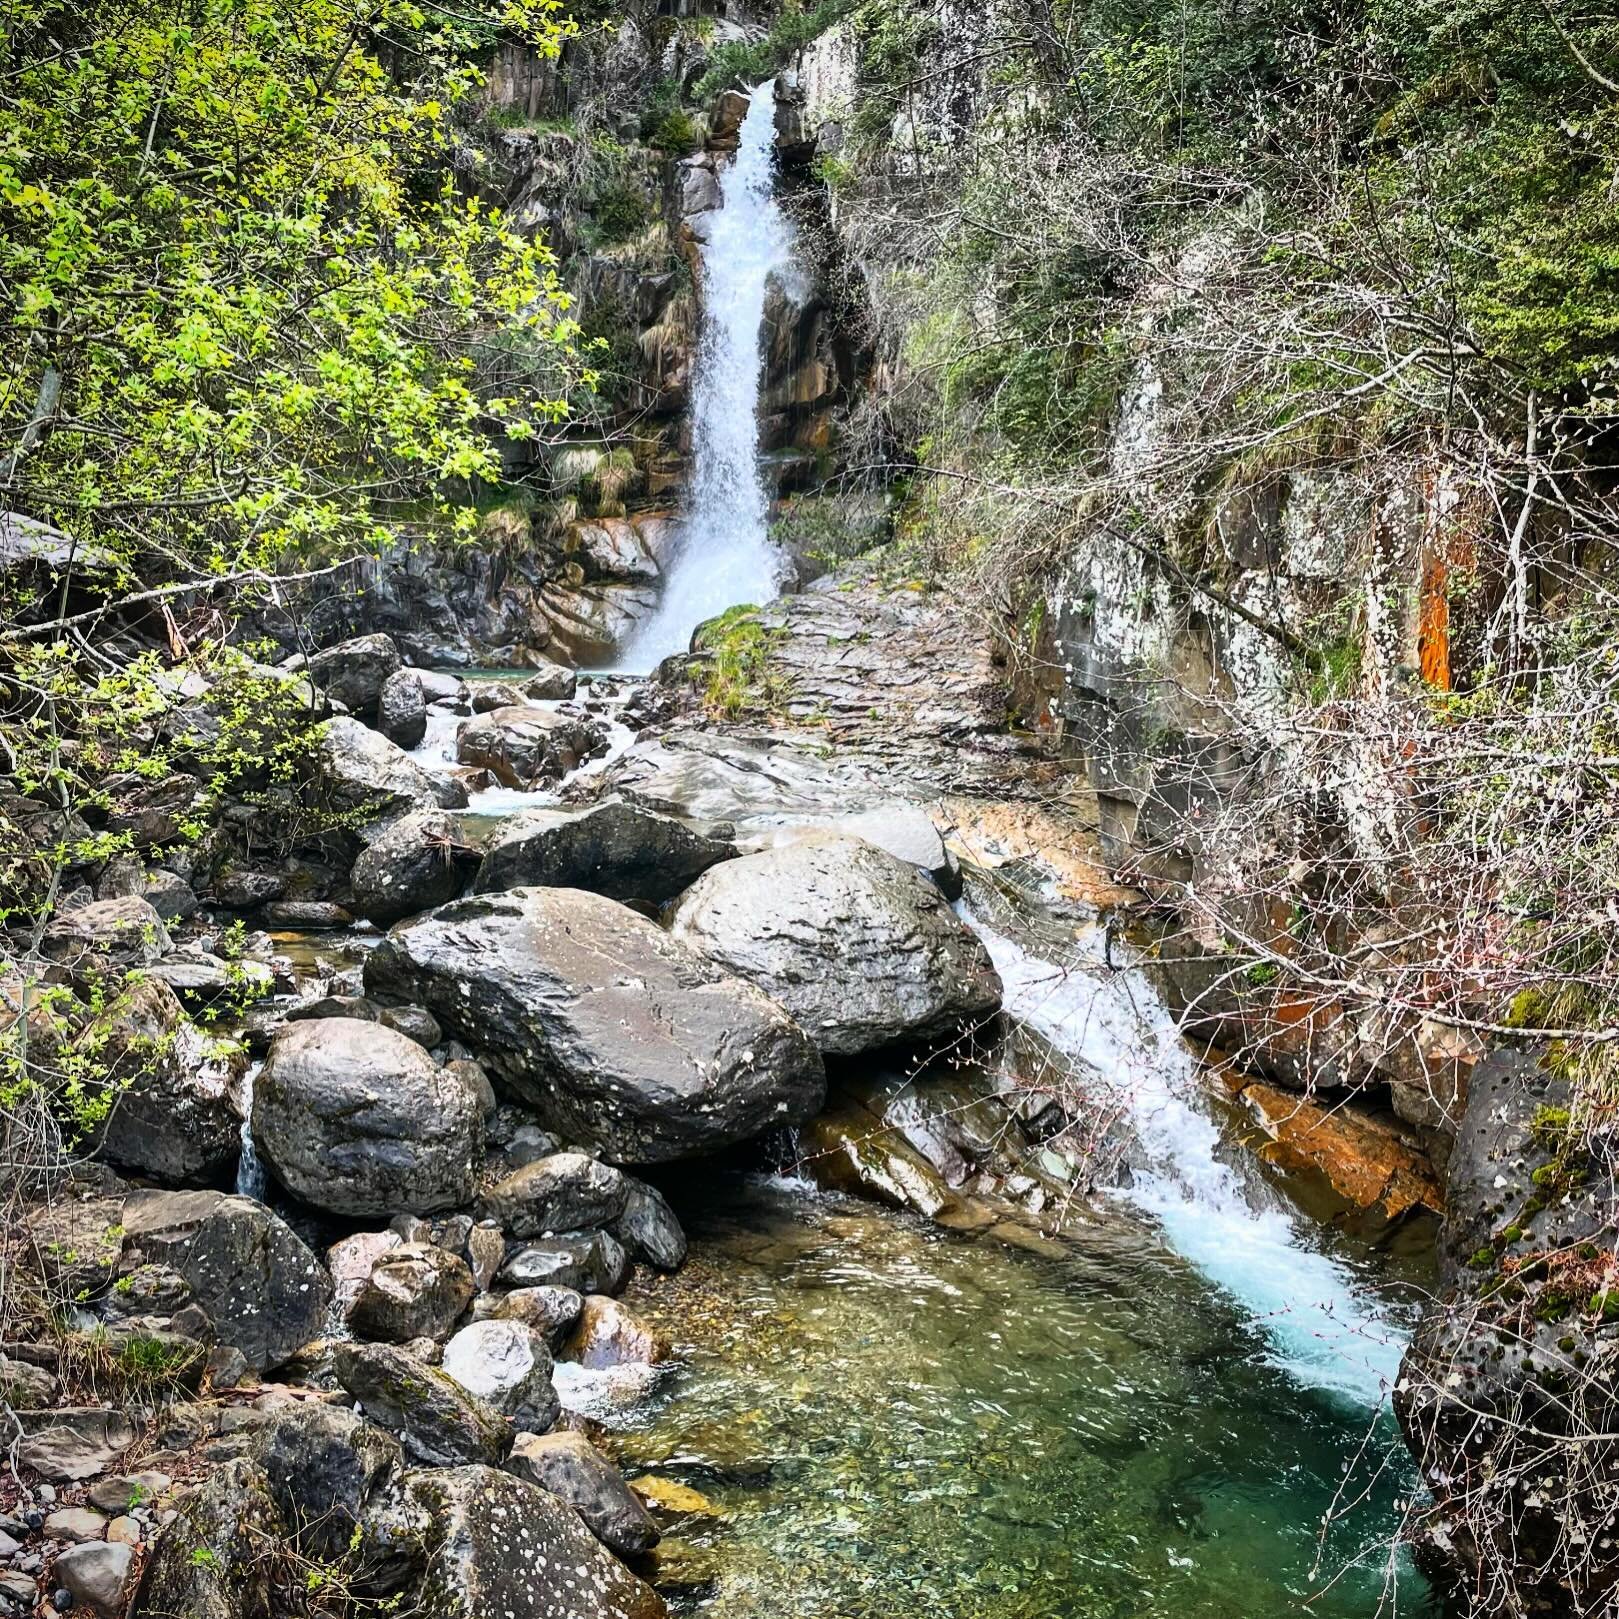 Turn on the Spigot. Light rain on melting snow makes for just right, clear water falls and blue pools. #waterfalls #waterfallphotography #nature #naturephotography #mountains #hiking  #Spain #NorthernSpain #SpainTour